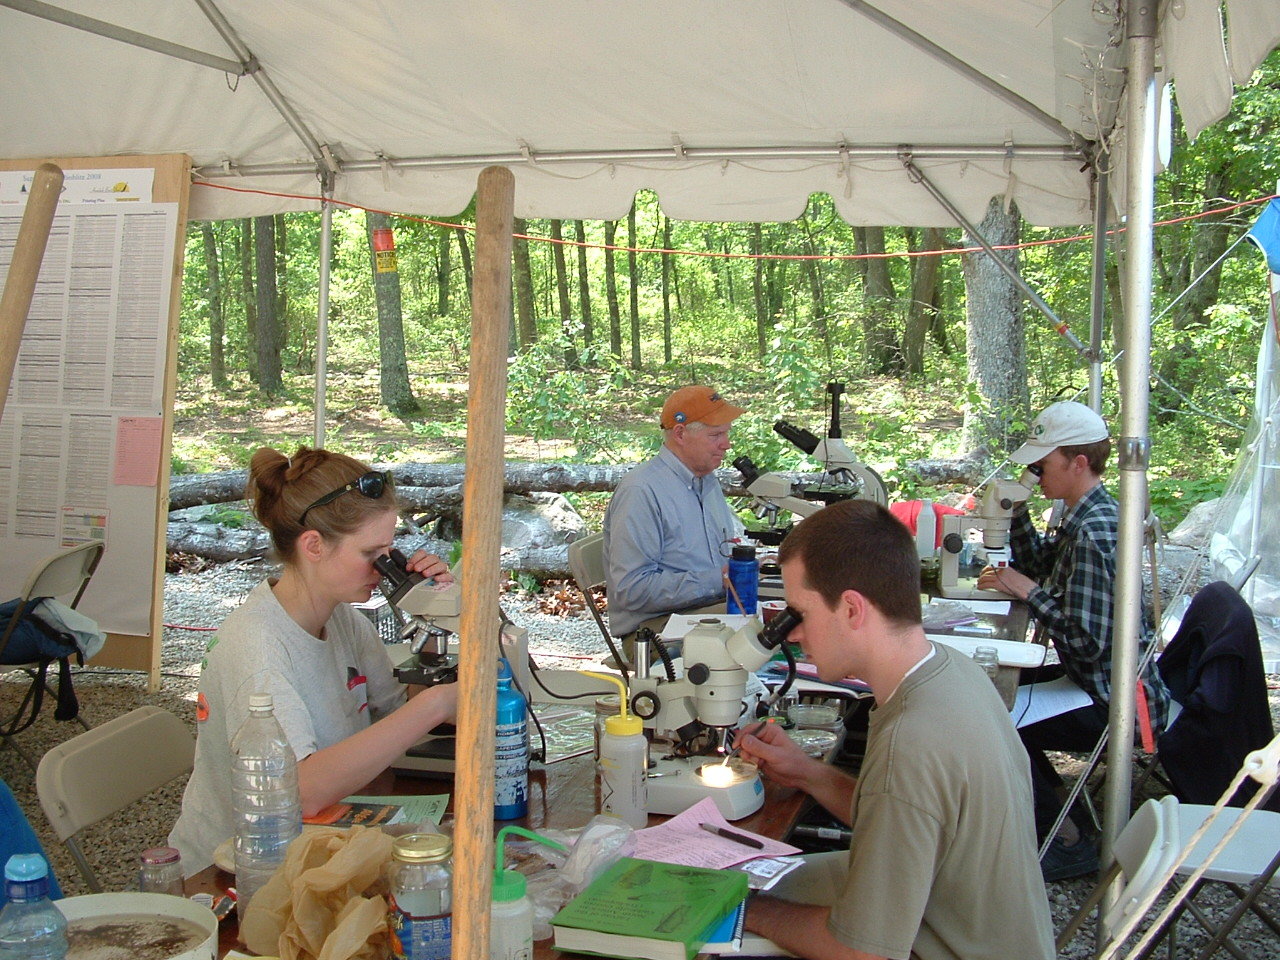 Teams count microscopic organisms as the 2 p.m. deadline approaches at the 2008 BioBlitz in Westerly.